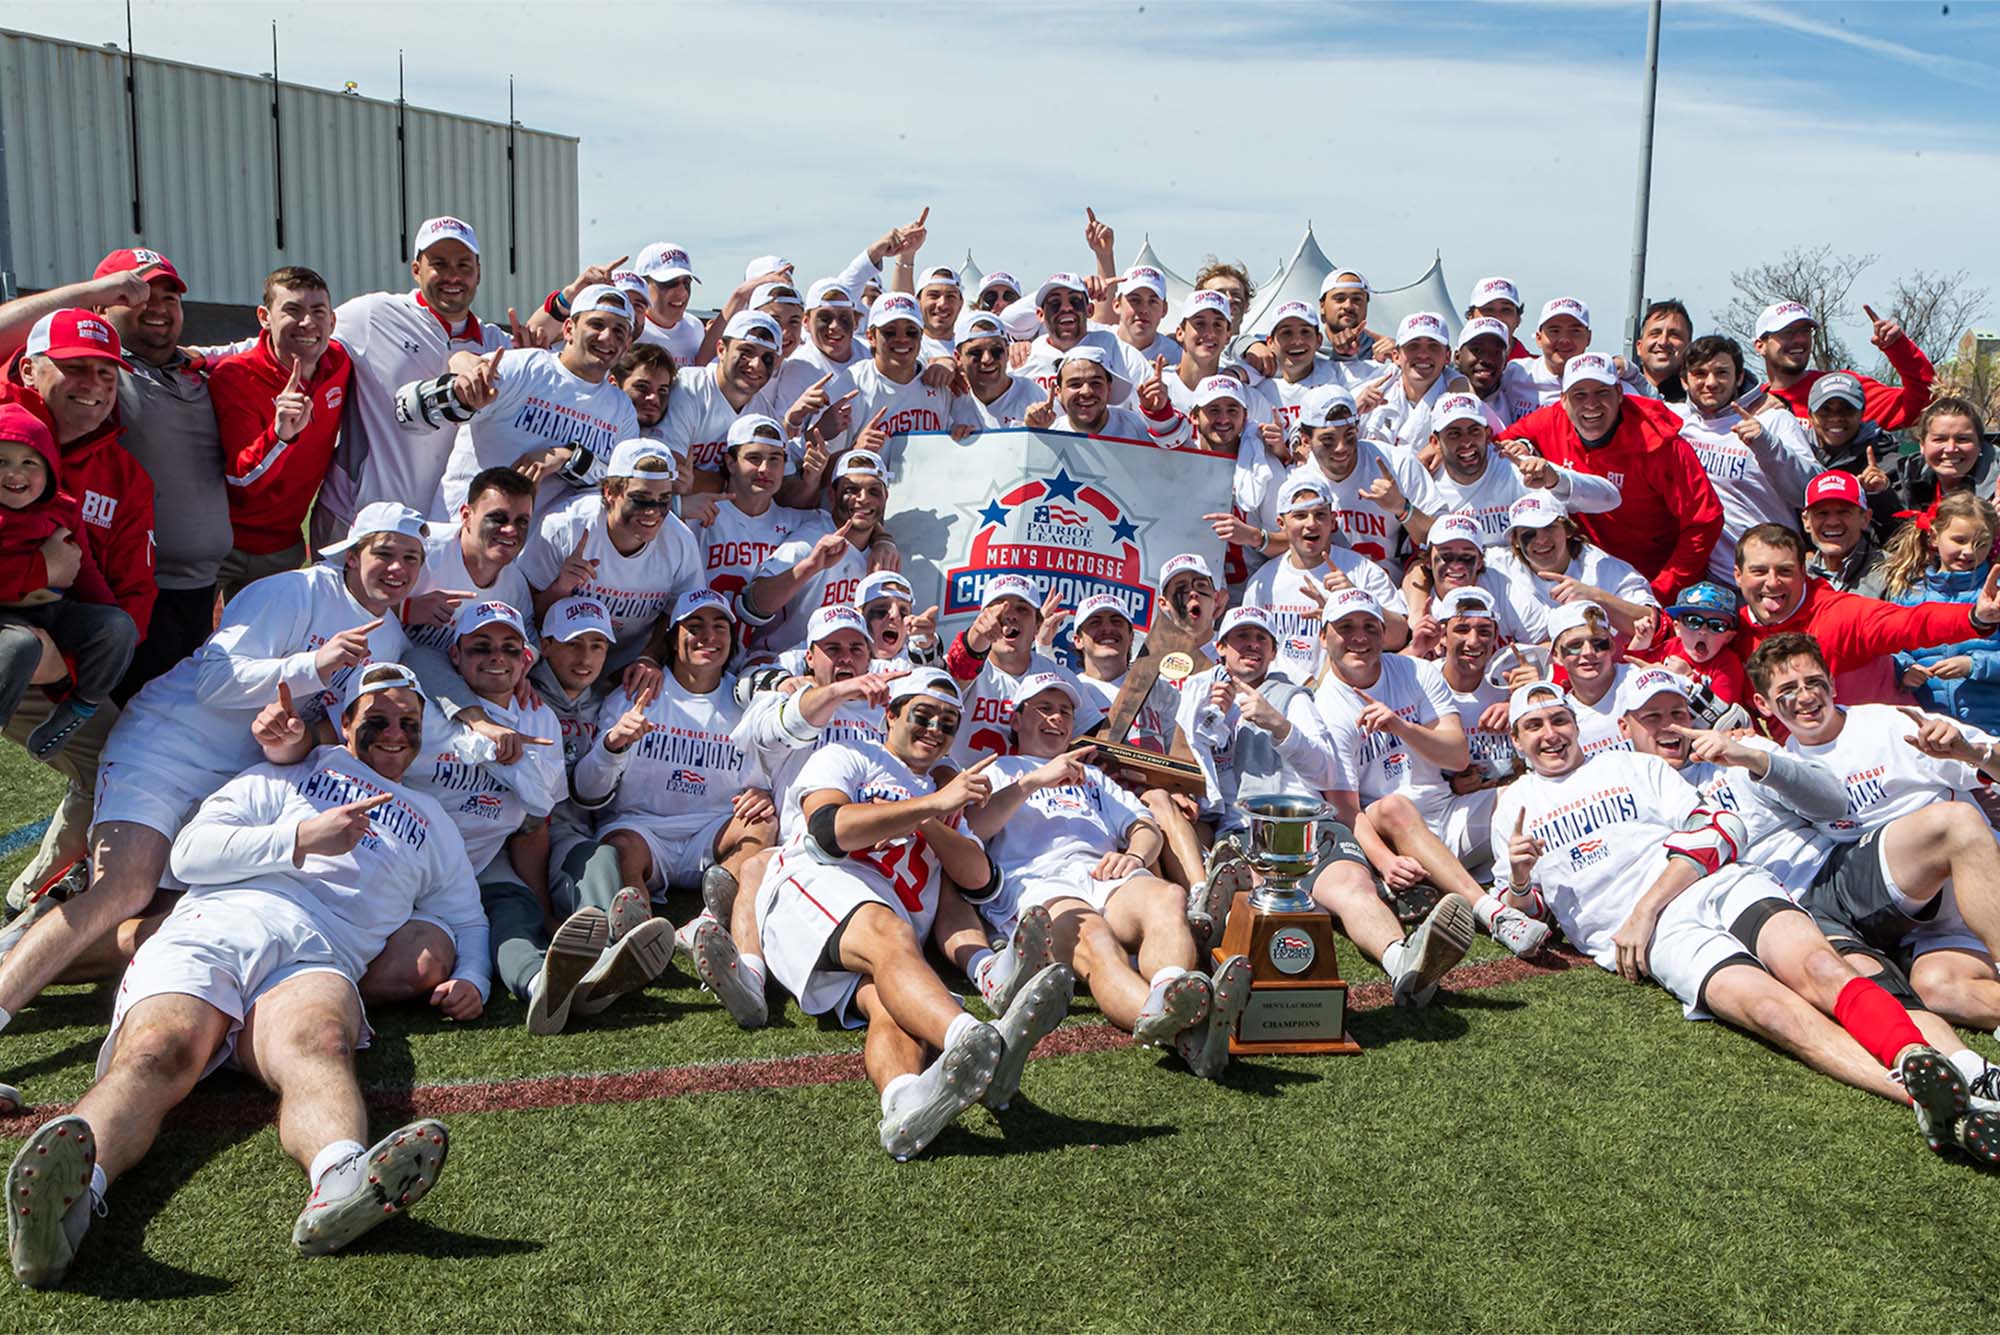 Group photo of the moments after BU claimed its first conference trophy. The mens lacrosses players sit and stand in white in a group with their coaches in red, and various family members. Everyone wears white hats and in the middle of the group they hold a sign that reads "Patriot League Men's Lacrosse Championship". a large silver trophy sits on the ground in front of the group.